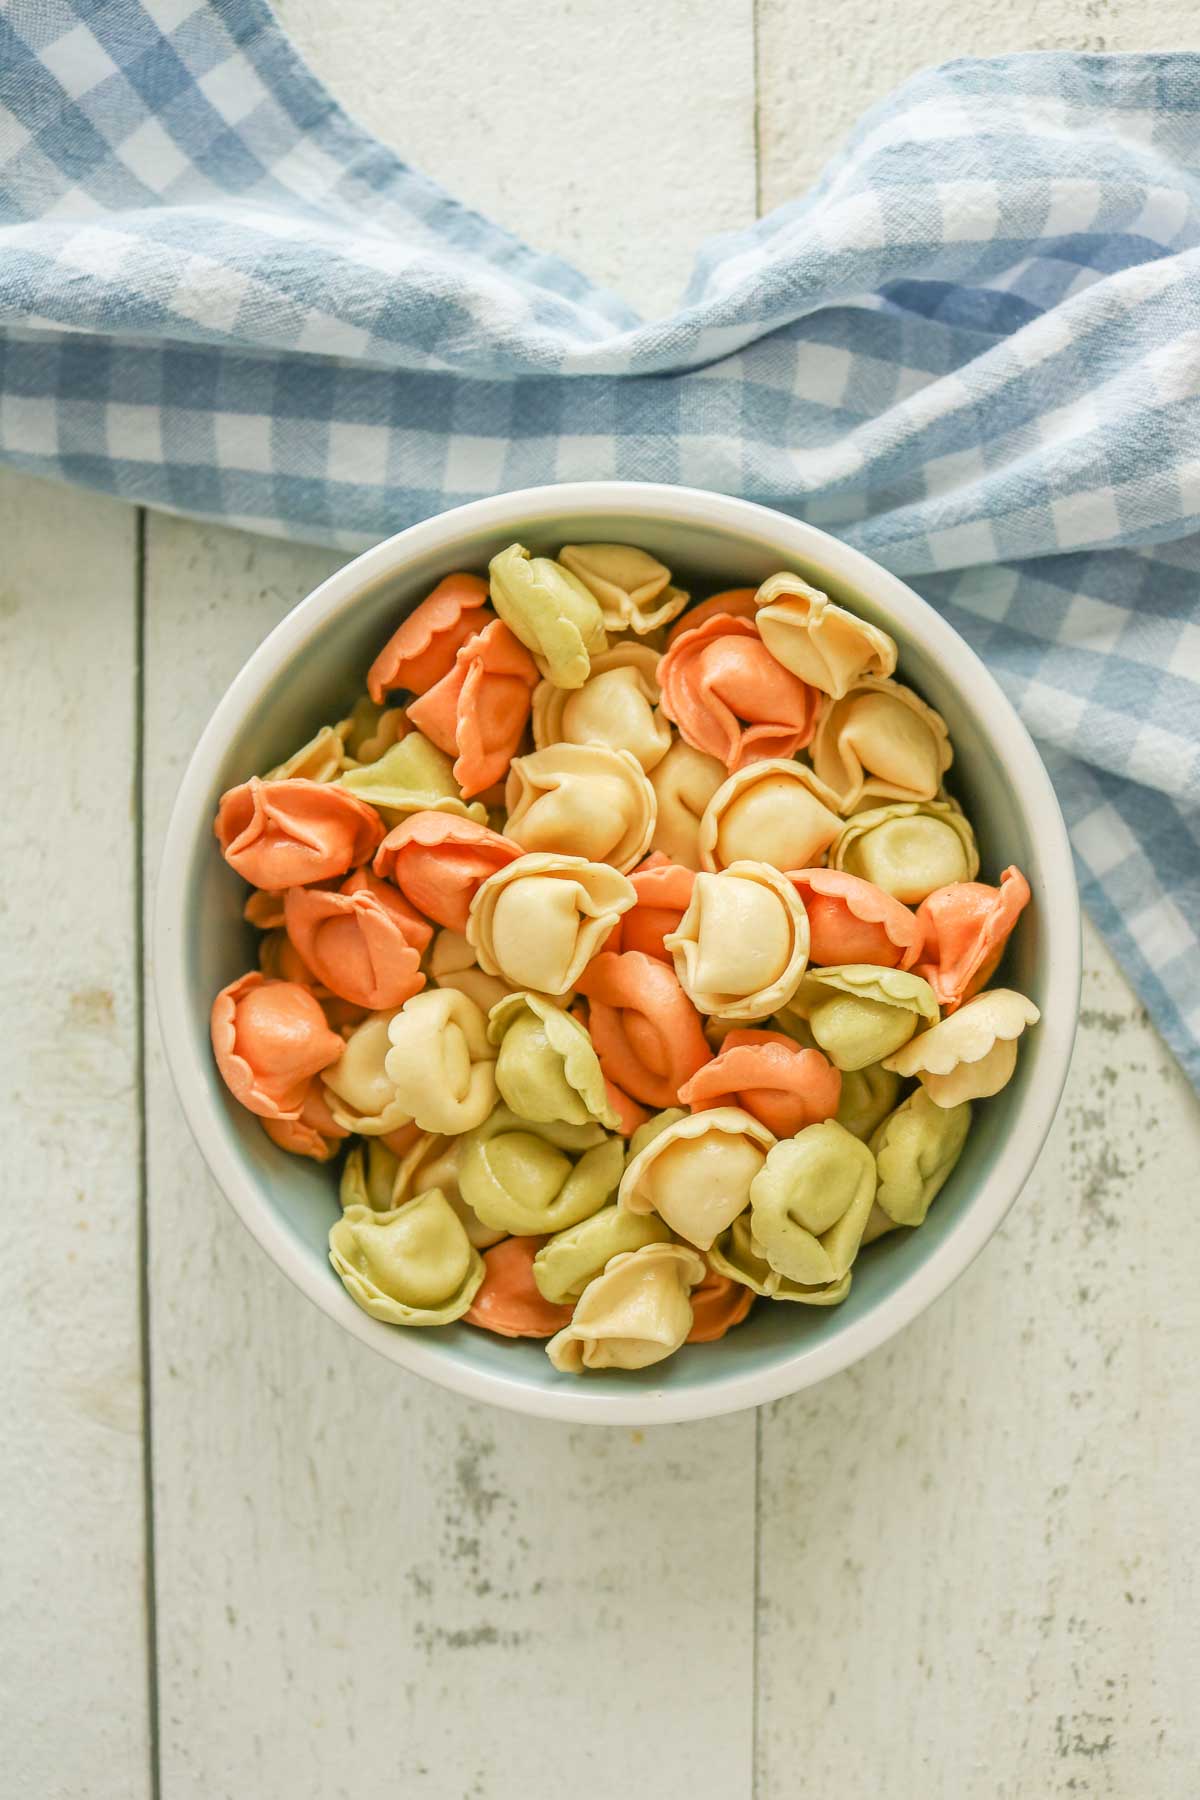 Uncooked store-bought cheese tortellini in a bowl.